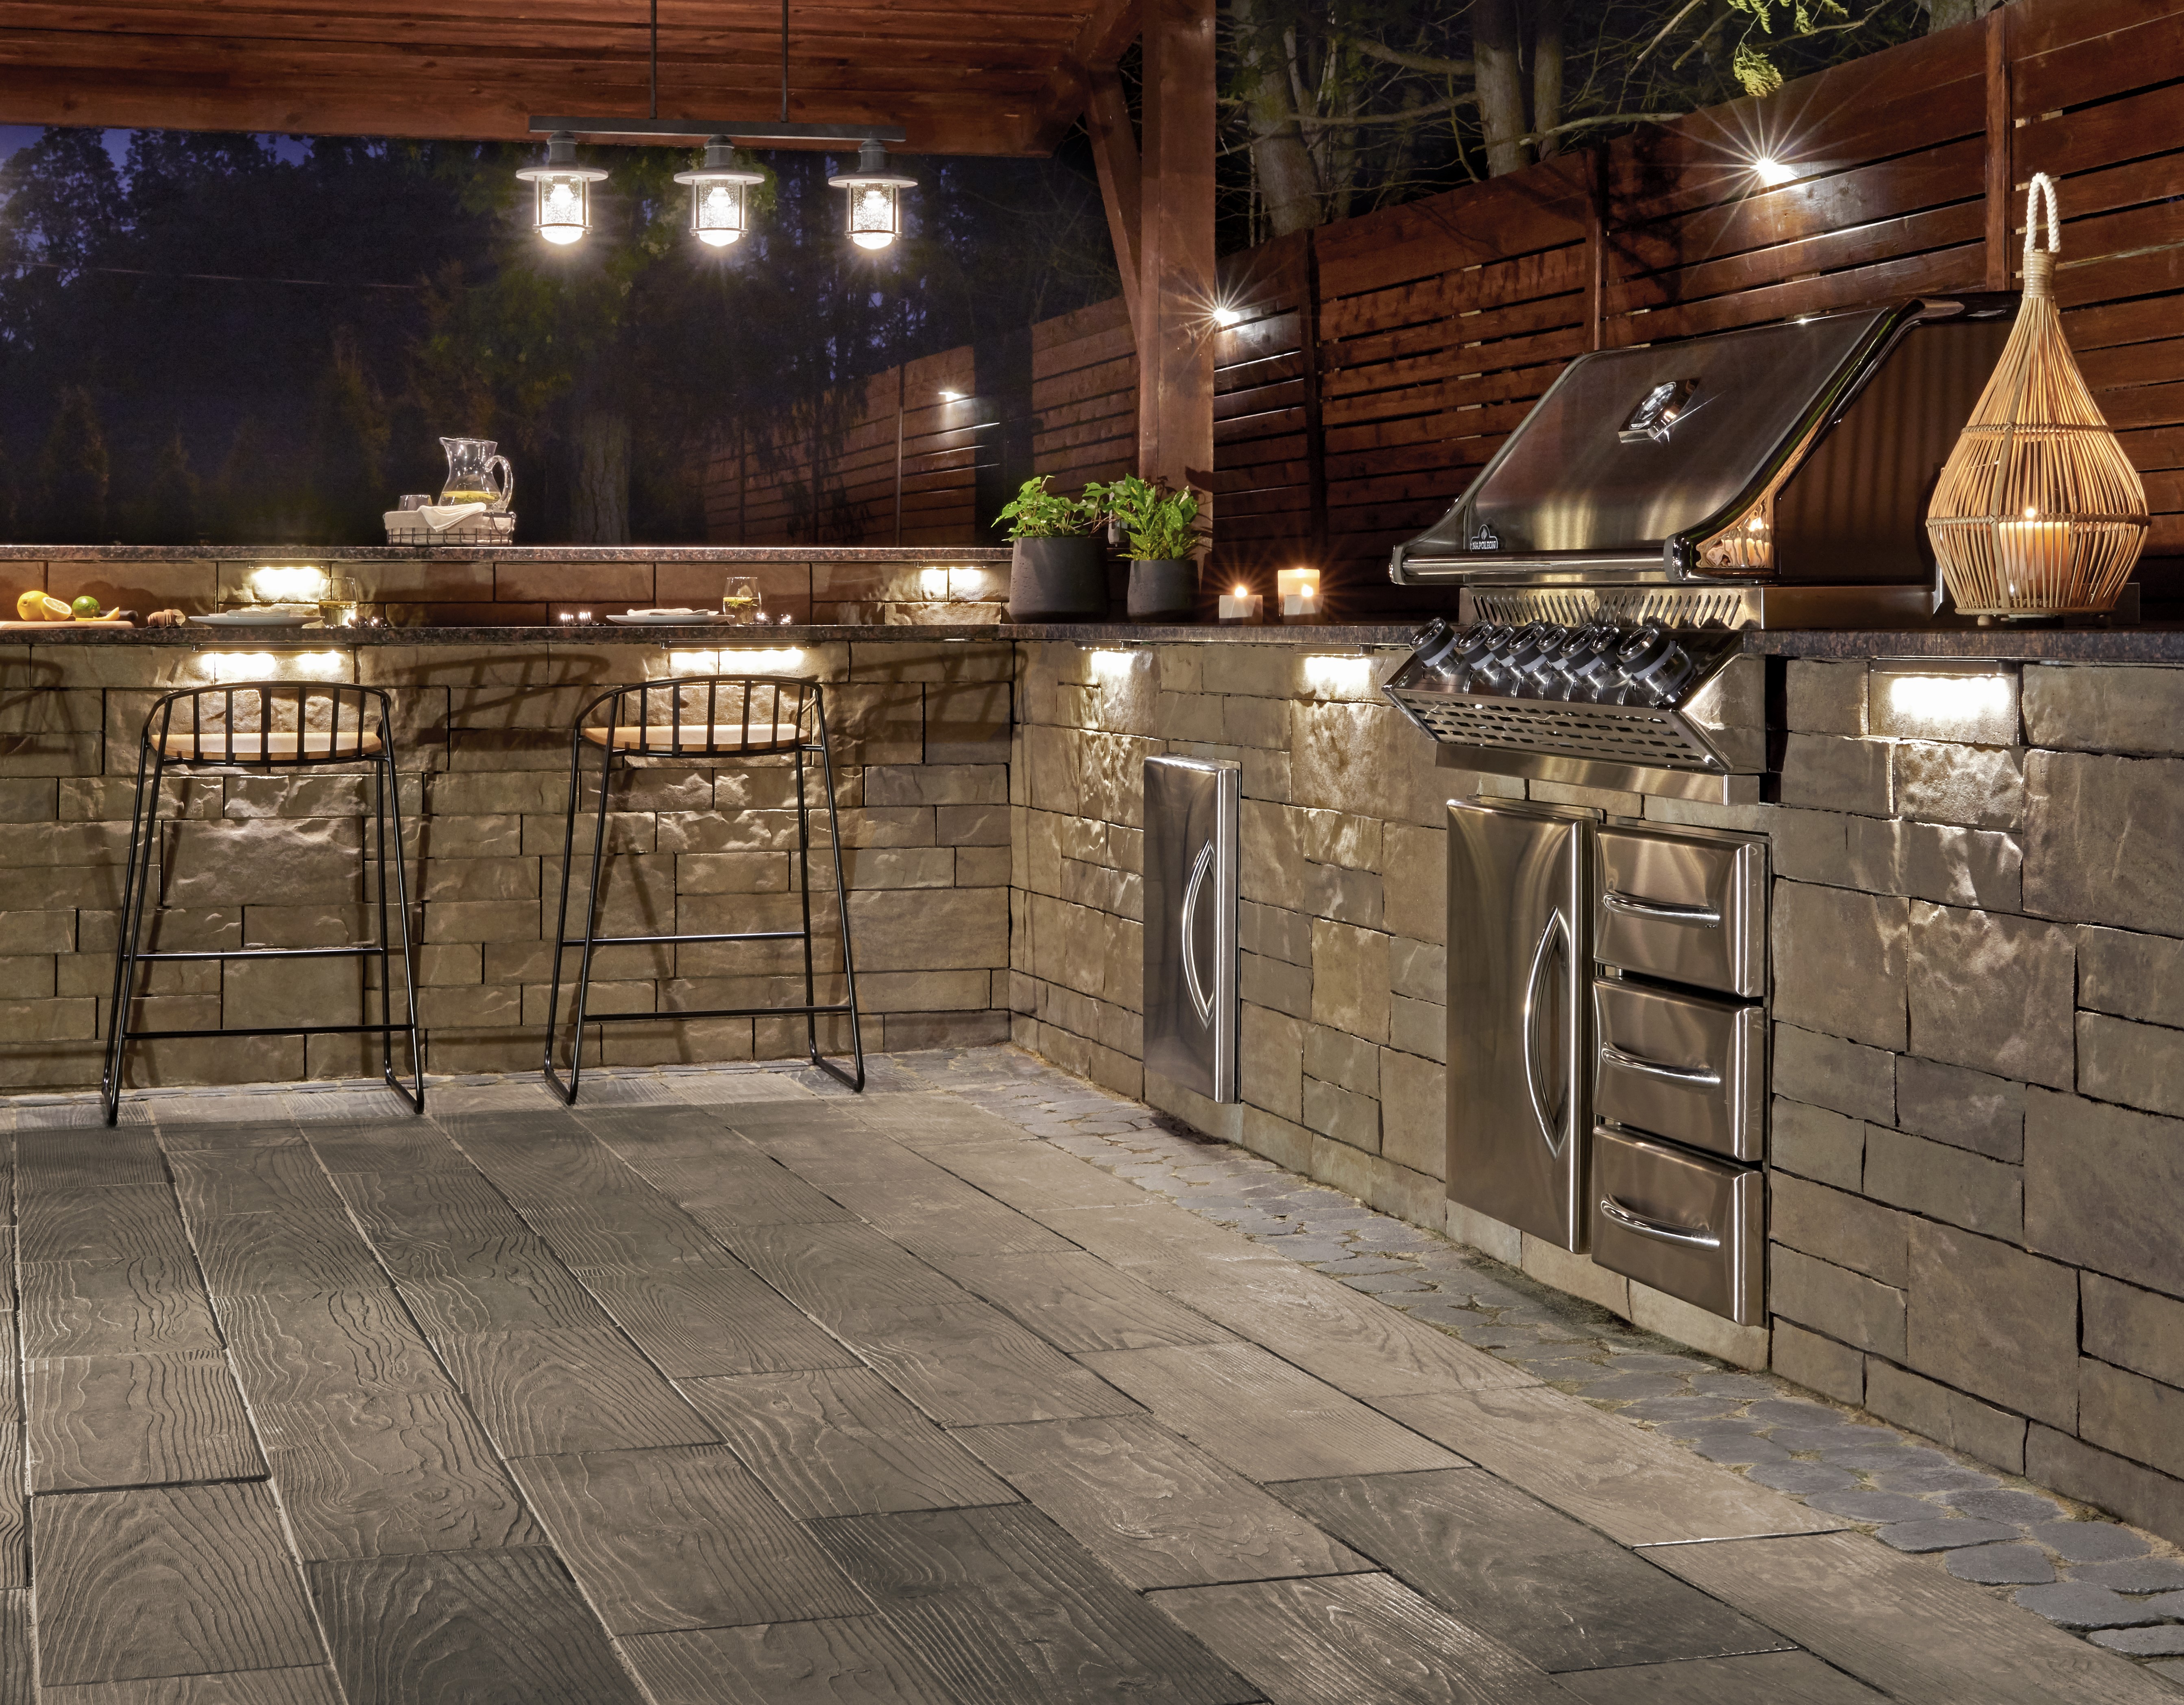 Design Your Own Customized Outdoor Kitchen with These 10 Tips